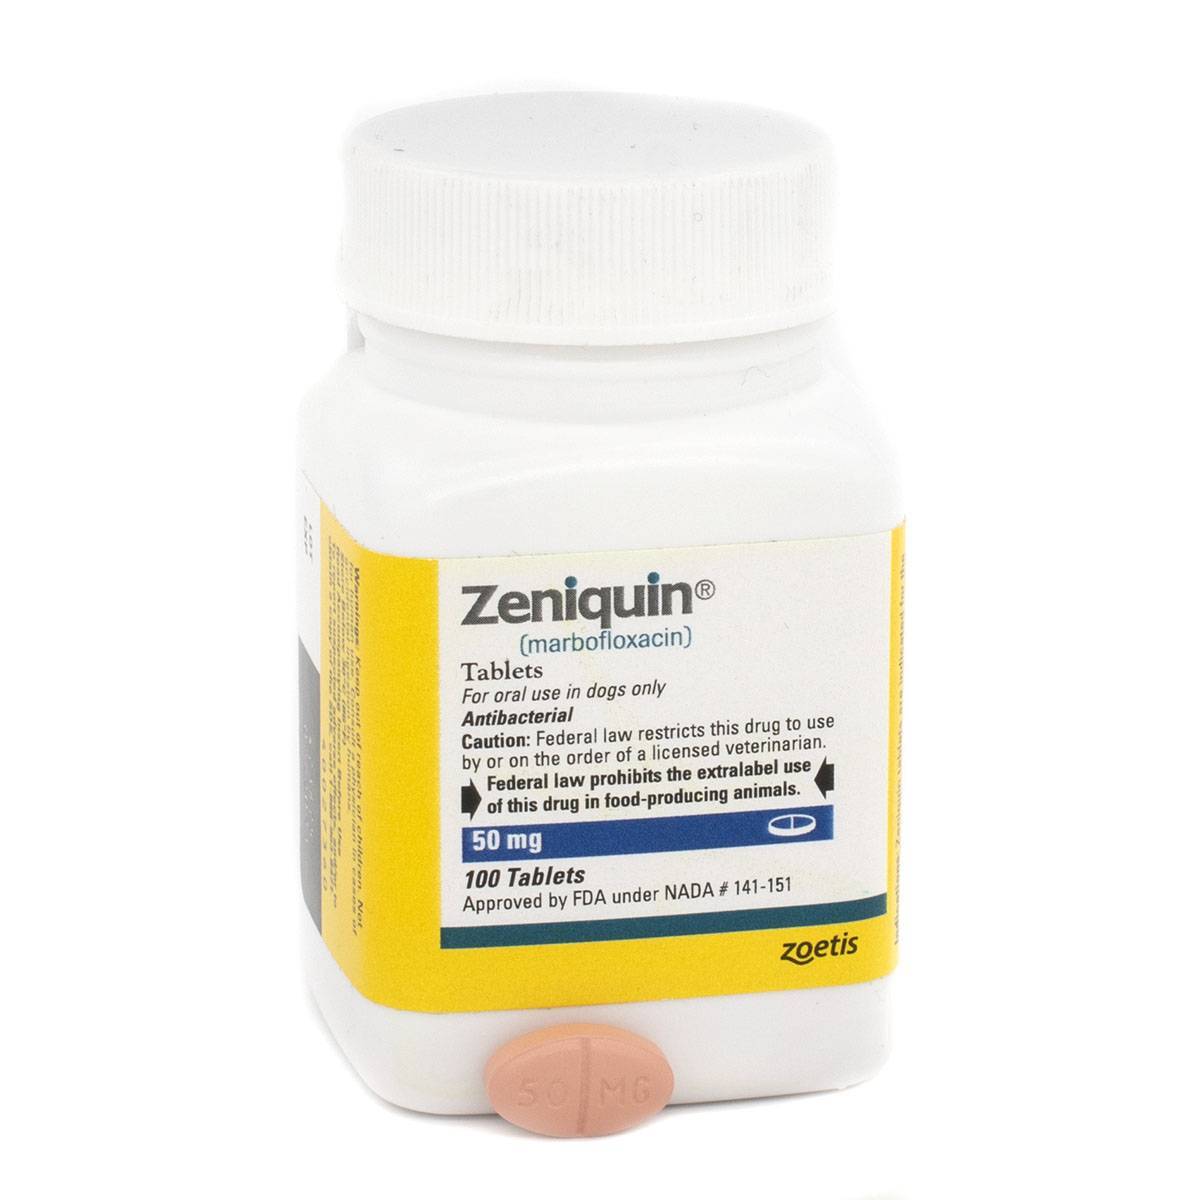 Marbofloxacin Zeniquin for Dogs and Cats VetRxDirect 200mg Tablet